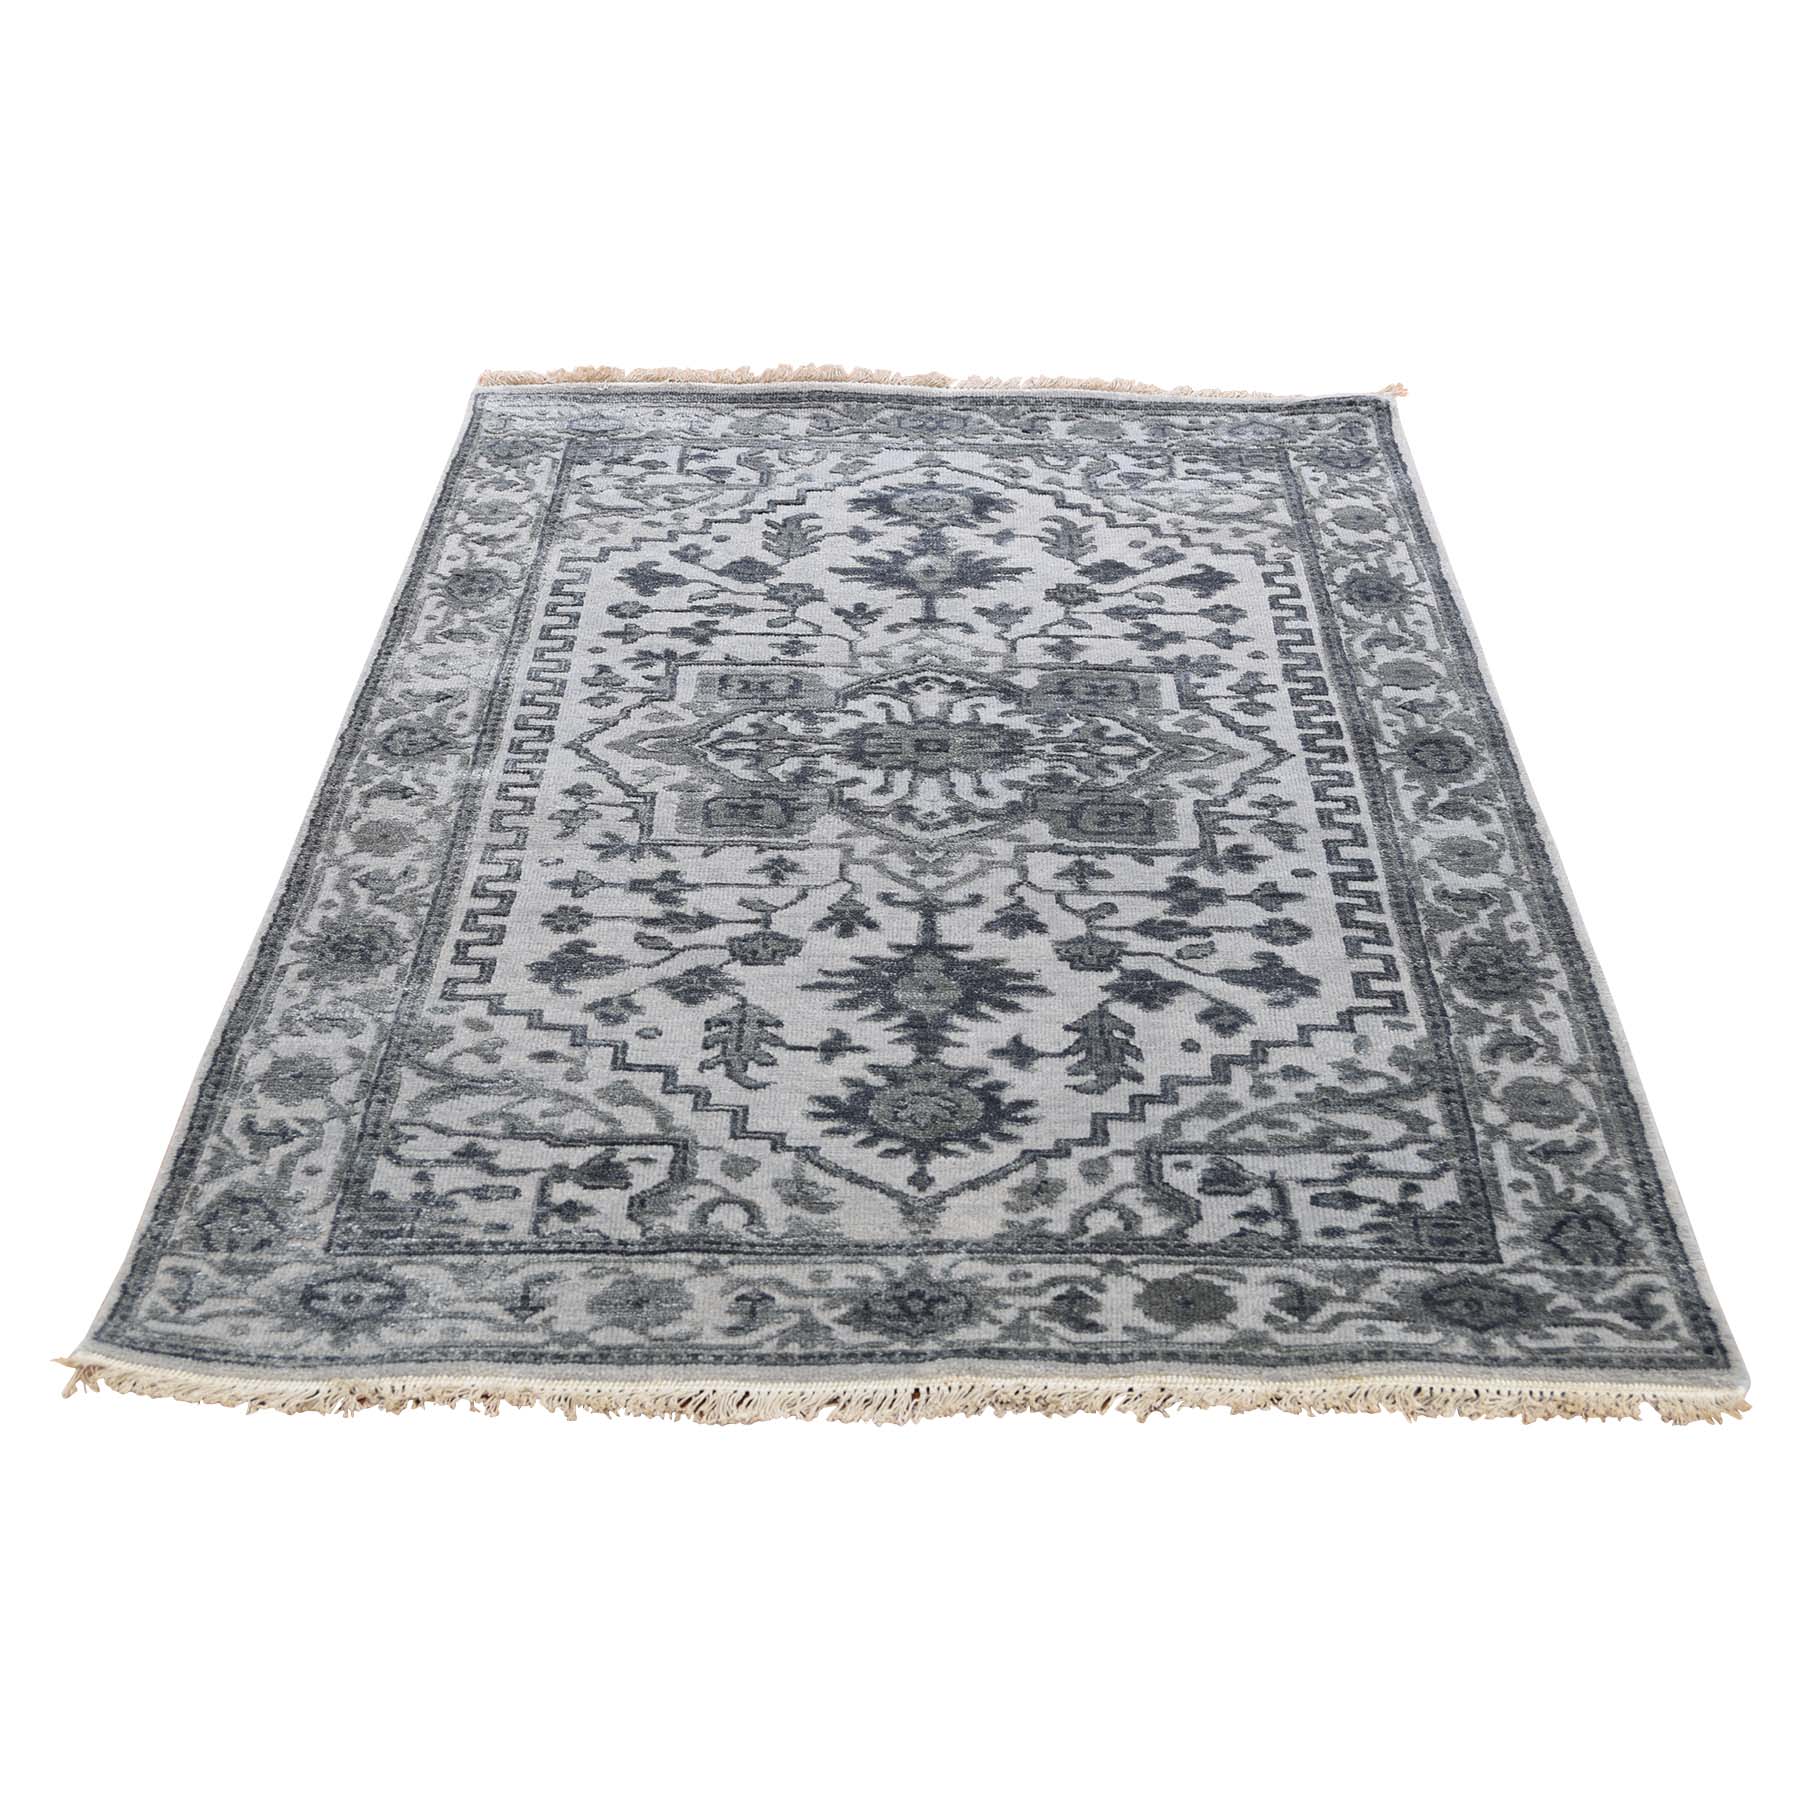 3-1 x5-2  Silver Heriz Design Wool And Silk Hi-lo Pile Hand-Knotted Oriental Rug 